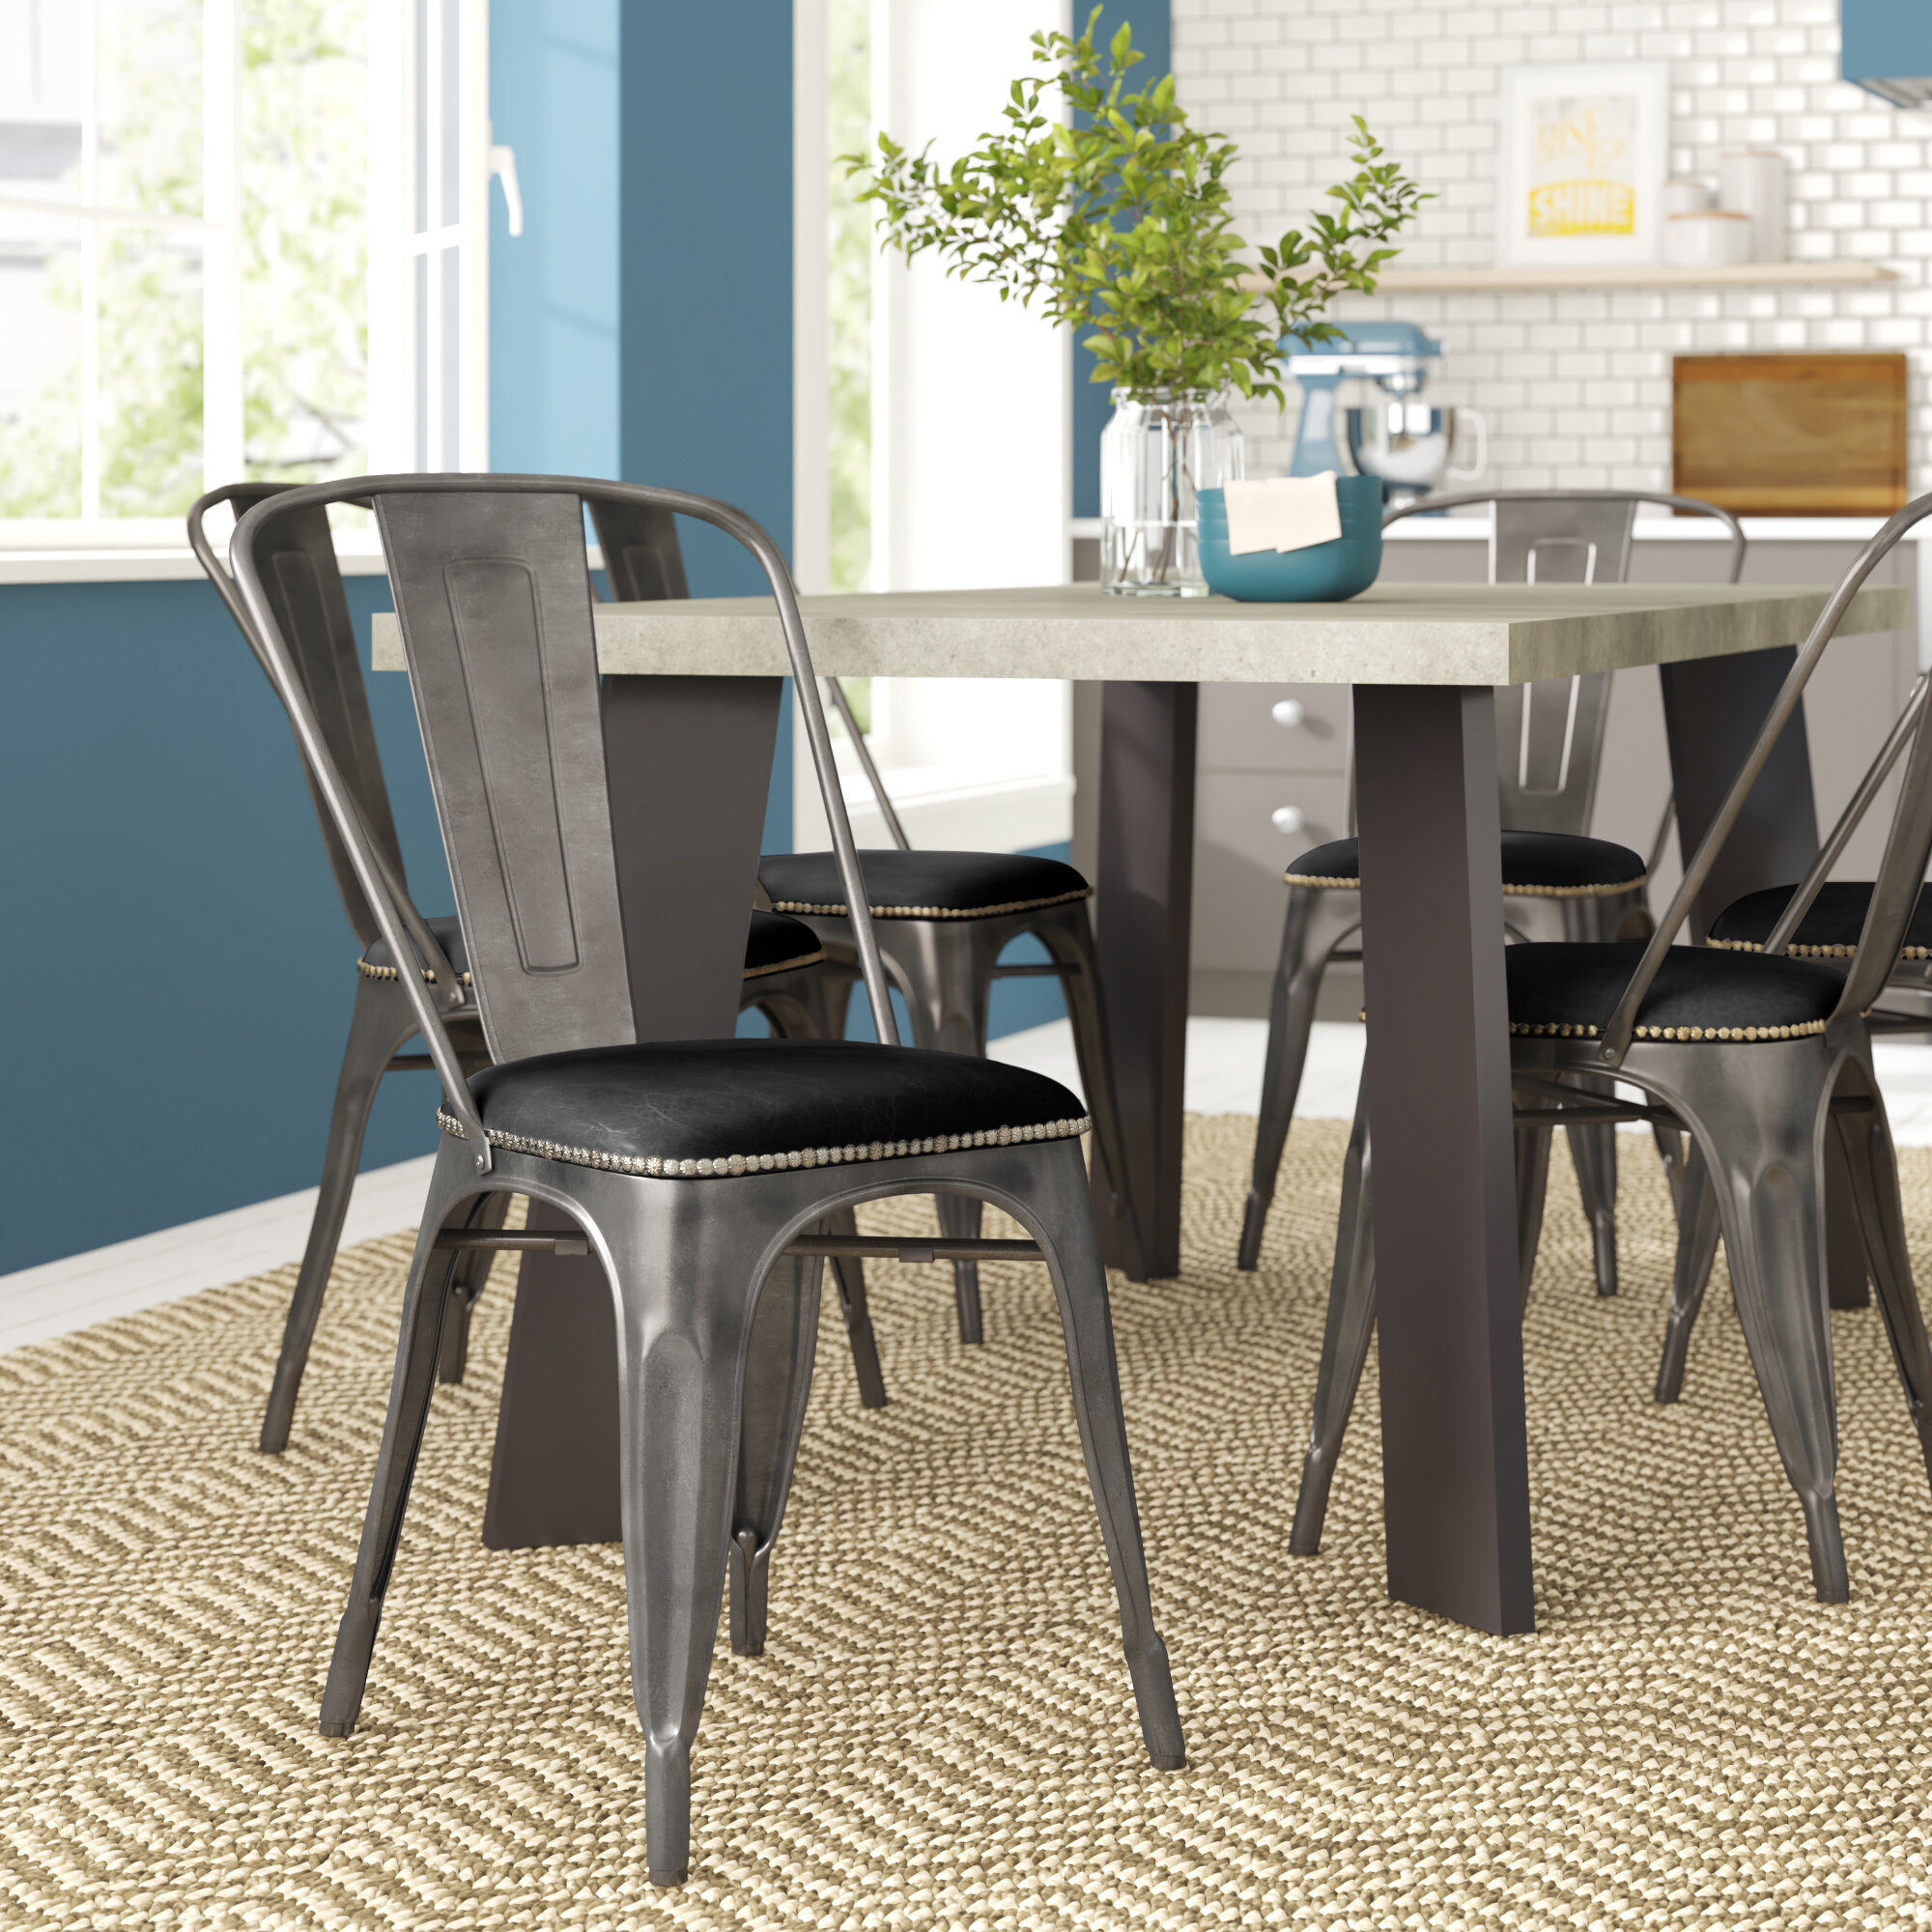 Metal Kitchen Dining Chairs You Ll Love In 2021 Wayfair